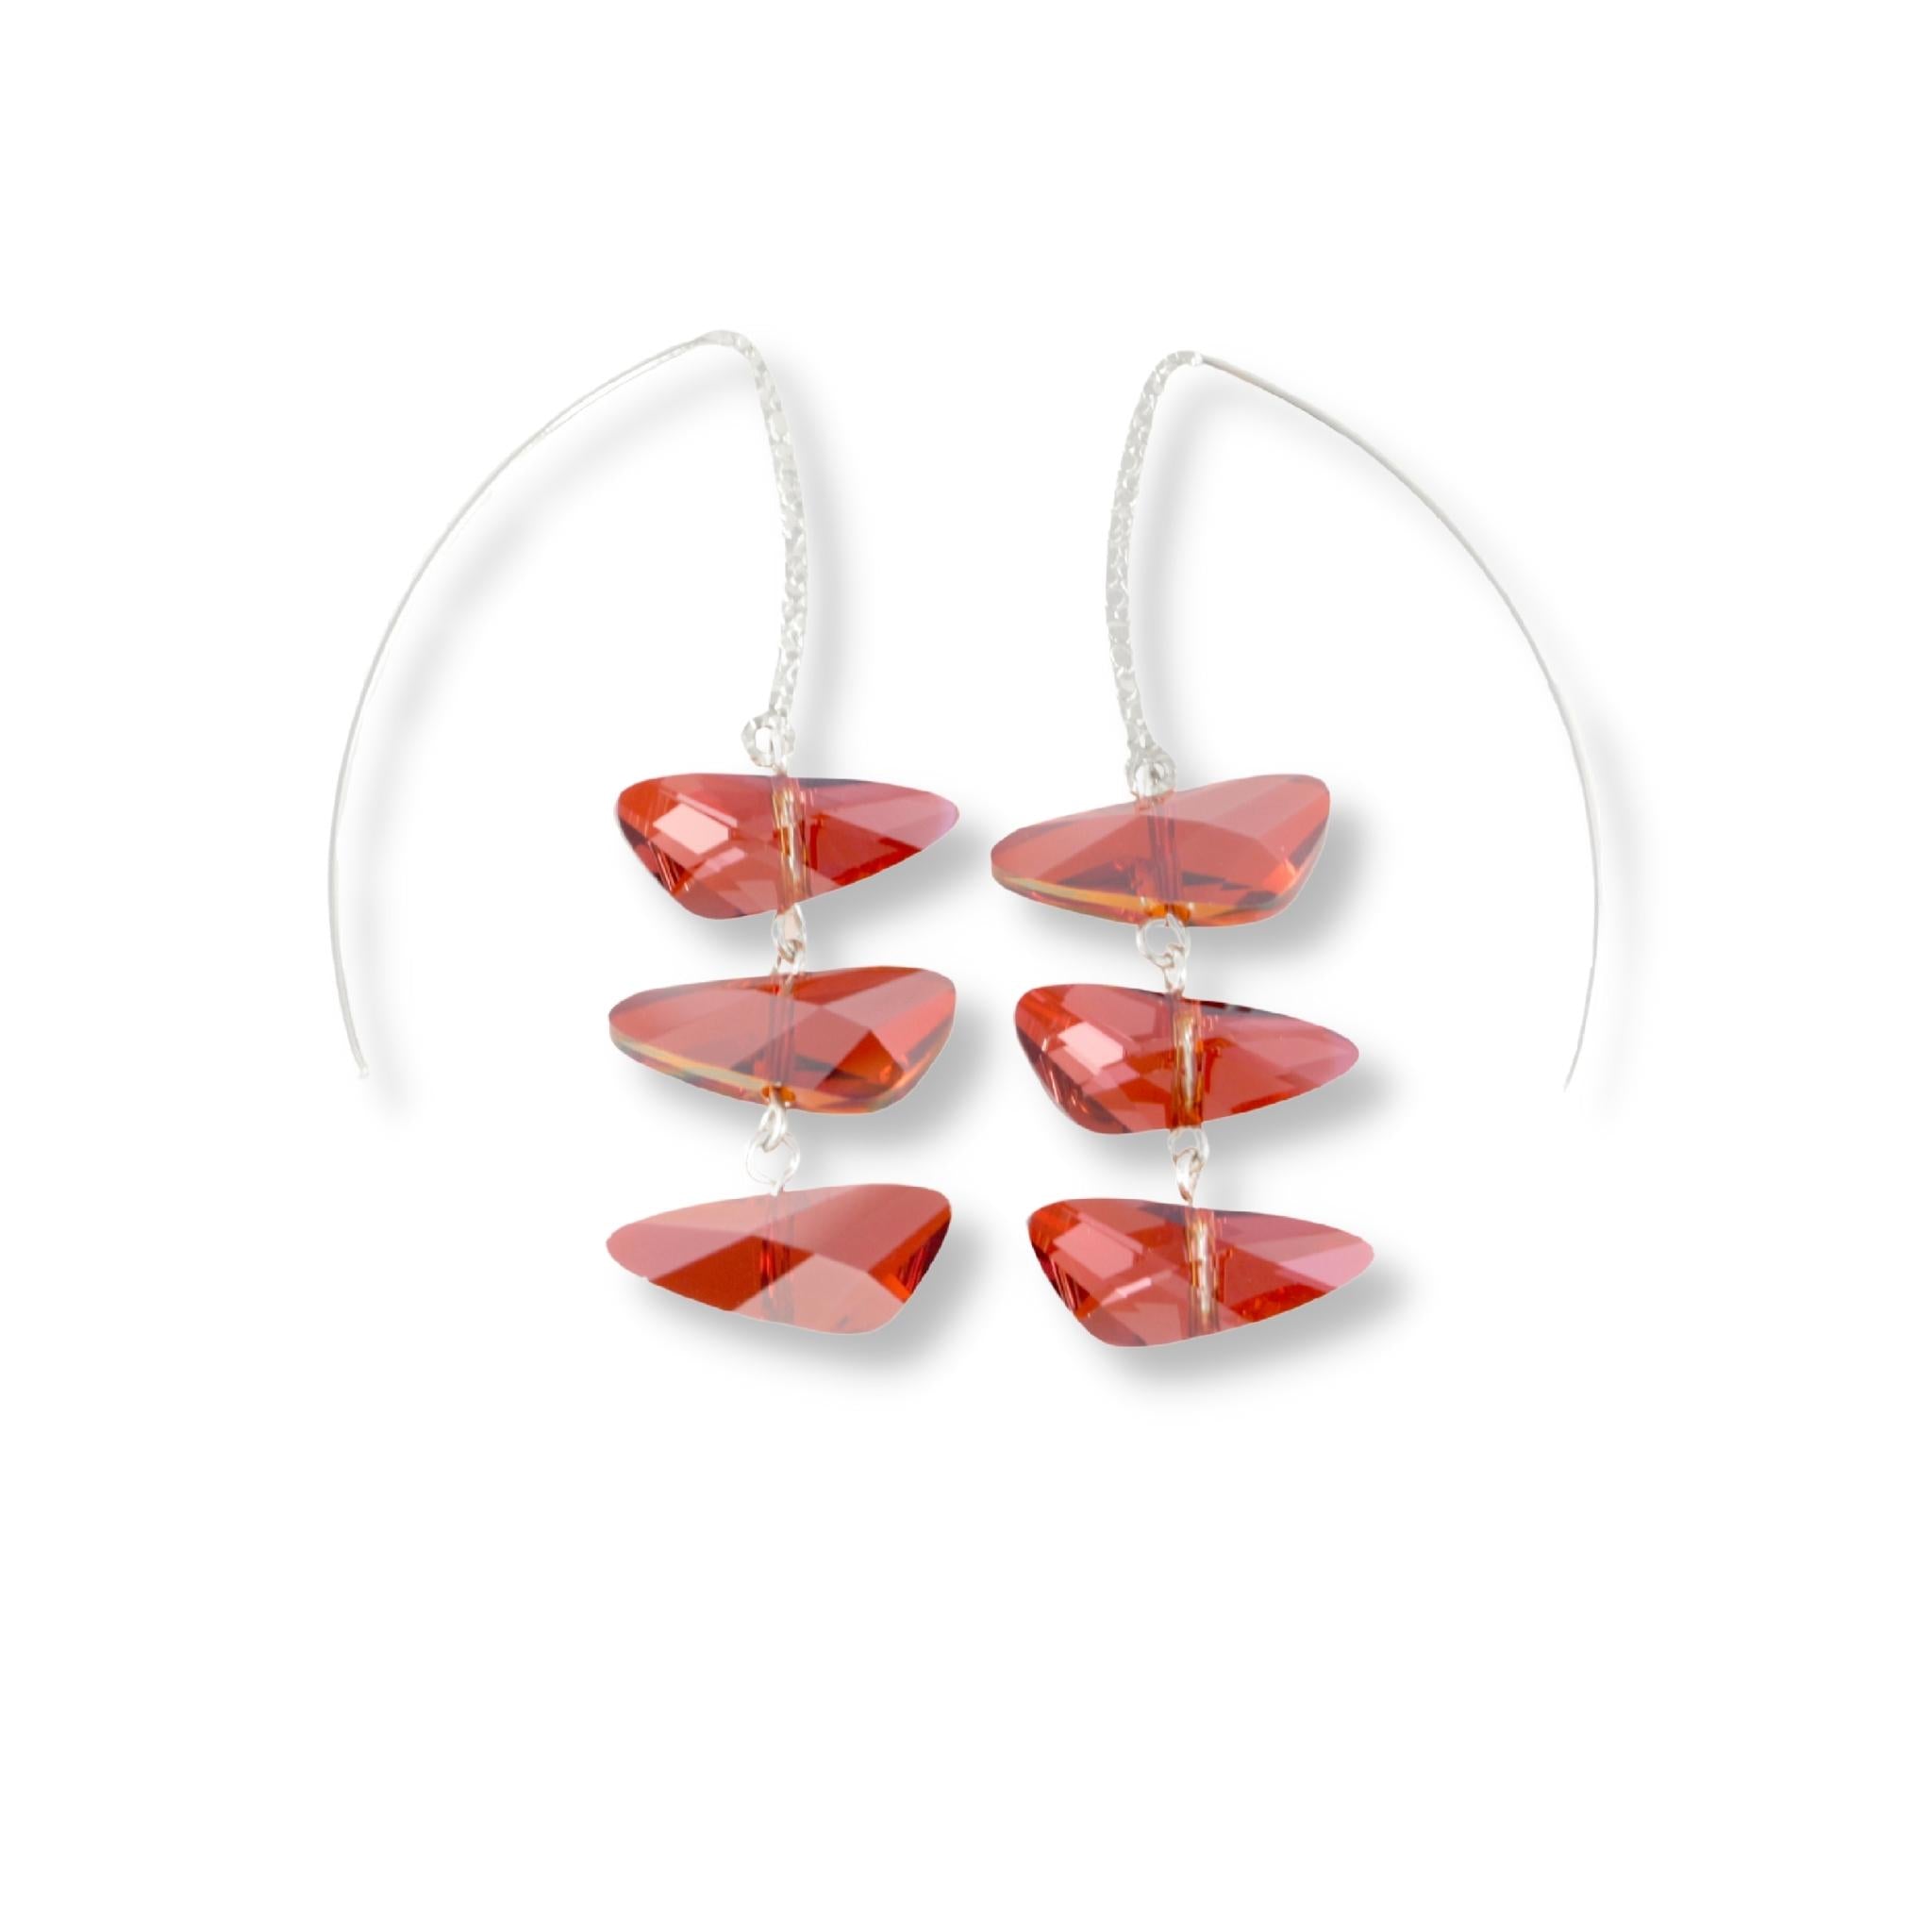 Wing shaped Swarovski crystal earrings in a reflective, deep cognac red color. The three crystal pendant is displayed on a long sterling silver marquise hook 